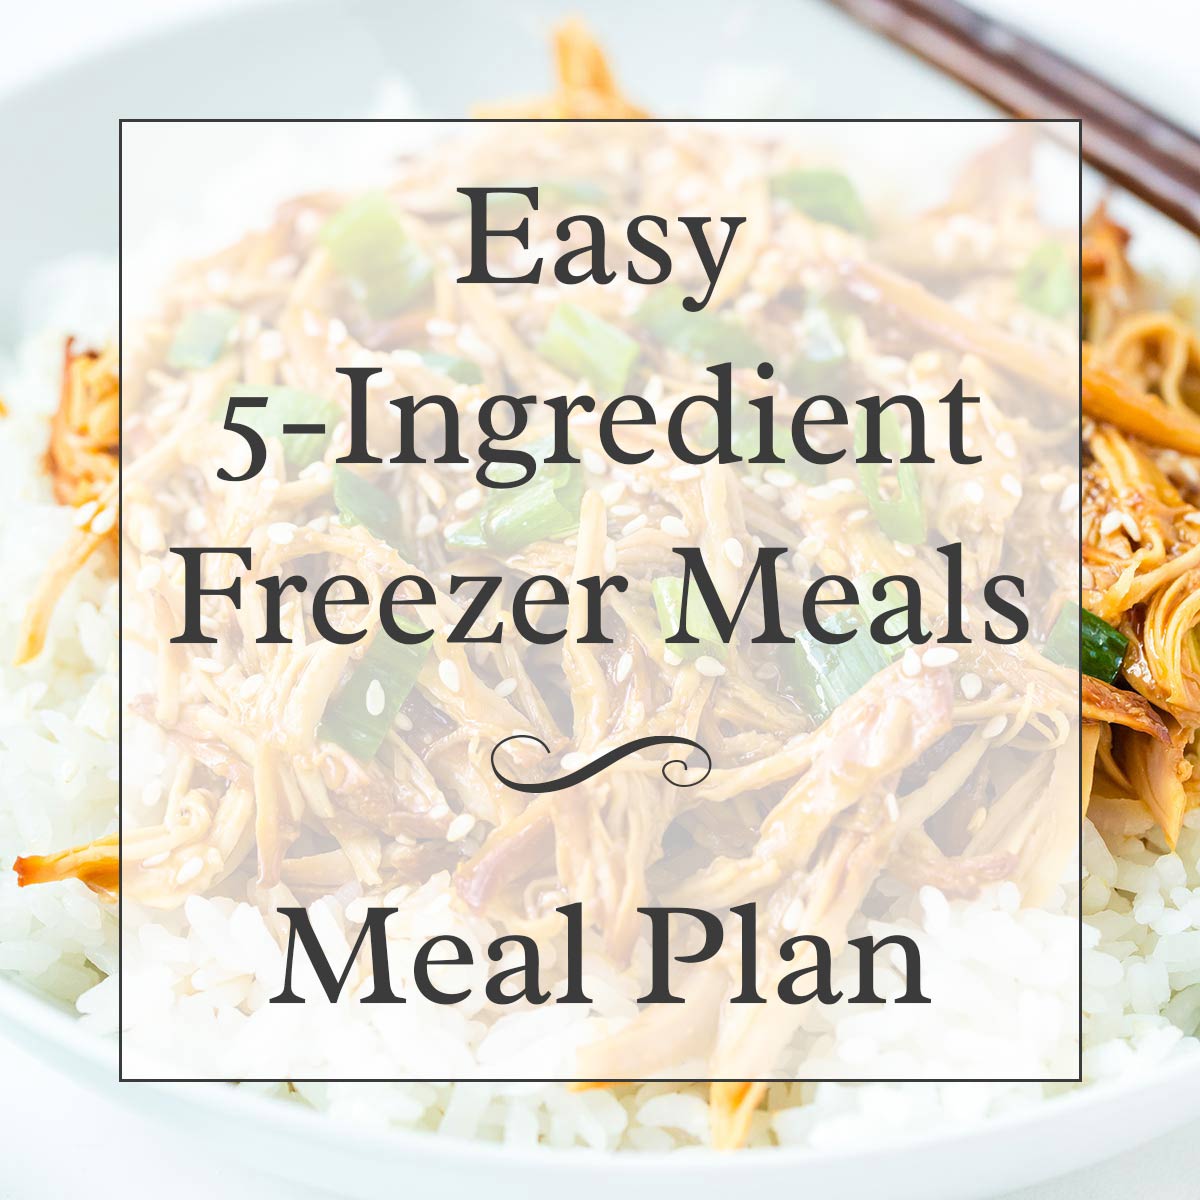 Photo of Honey Sesame Chicken Freezer Meal with overlay text label for "Easy 5-Ingredient Freezer Meals Plan".